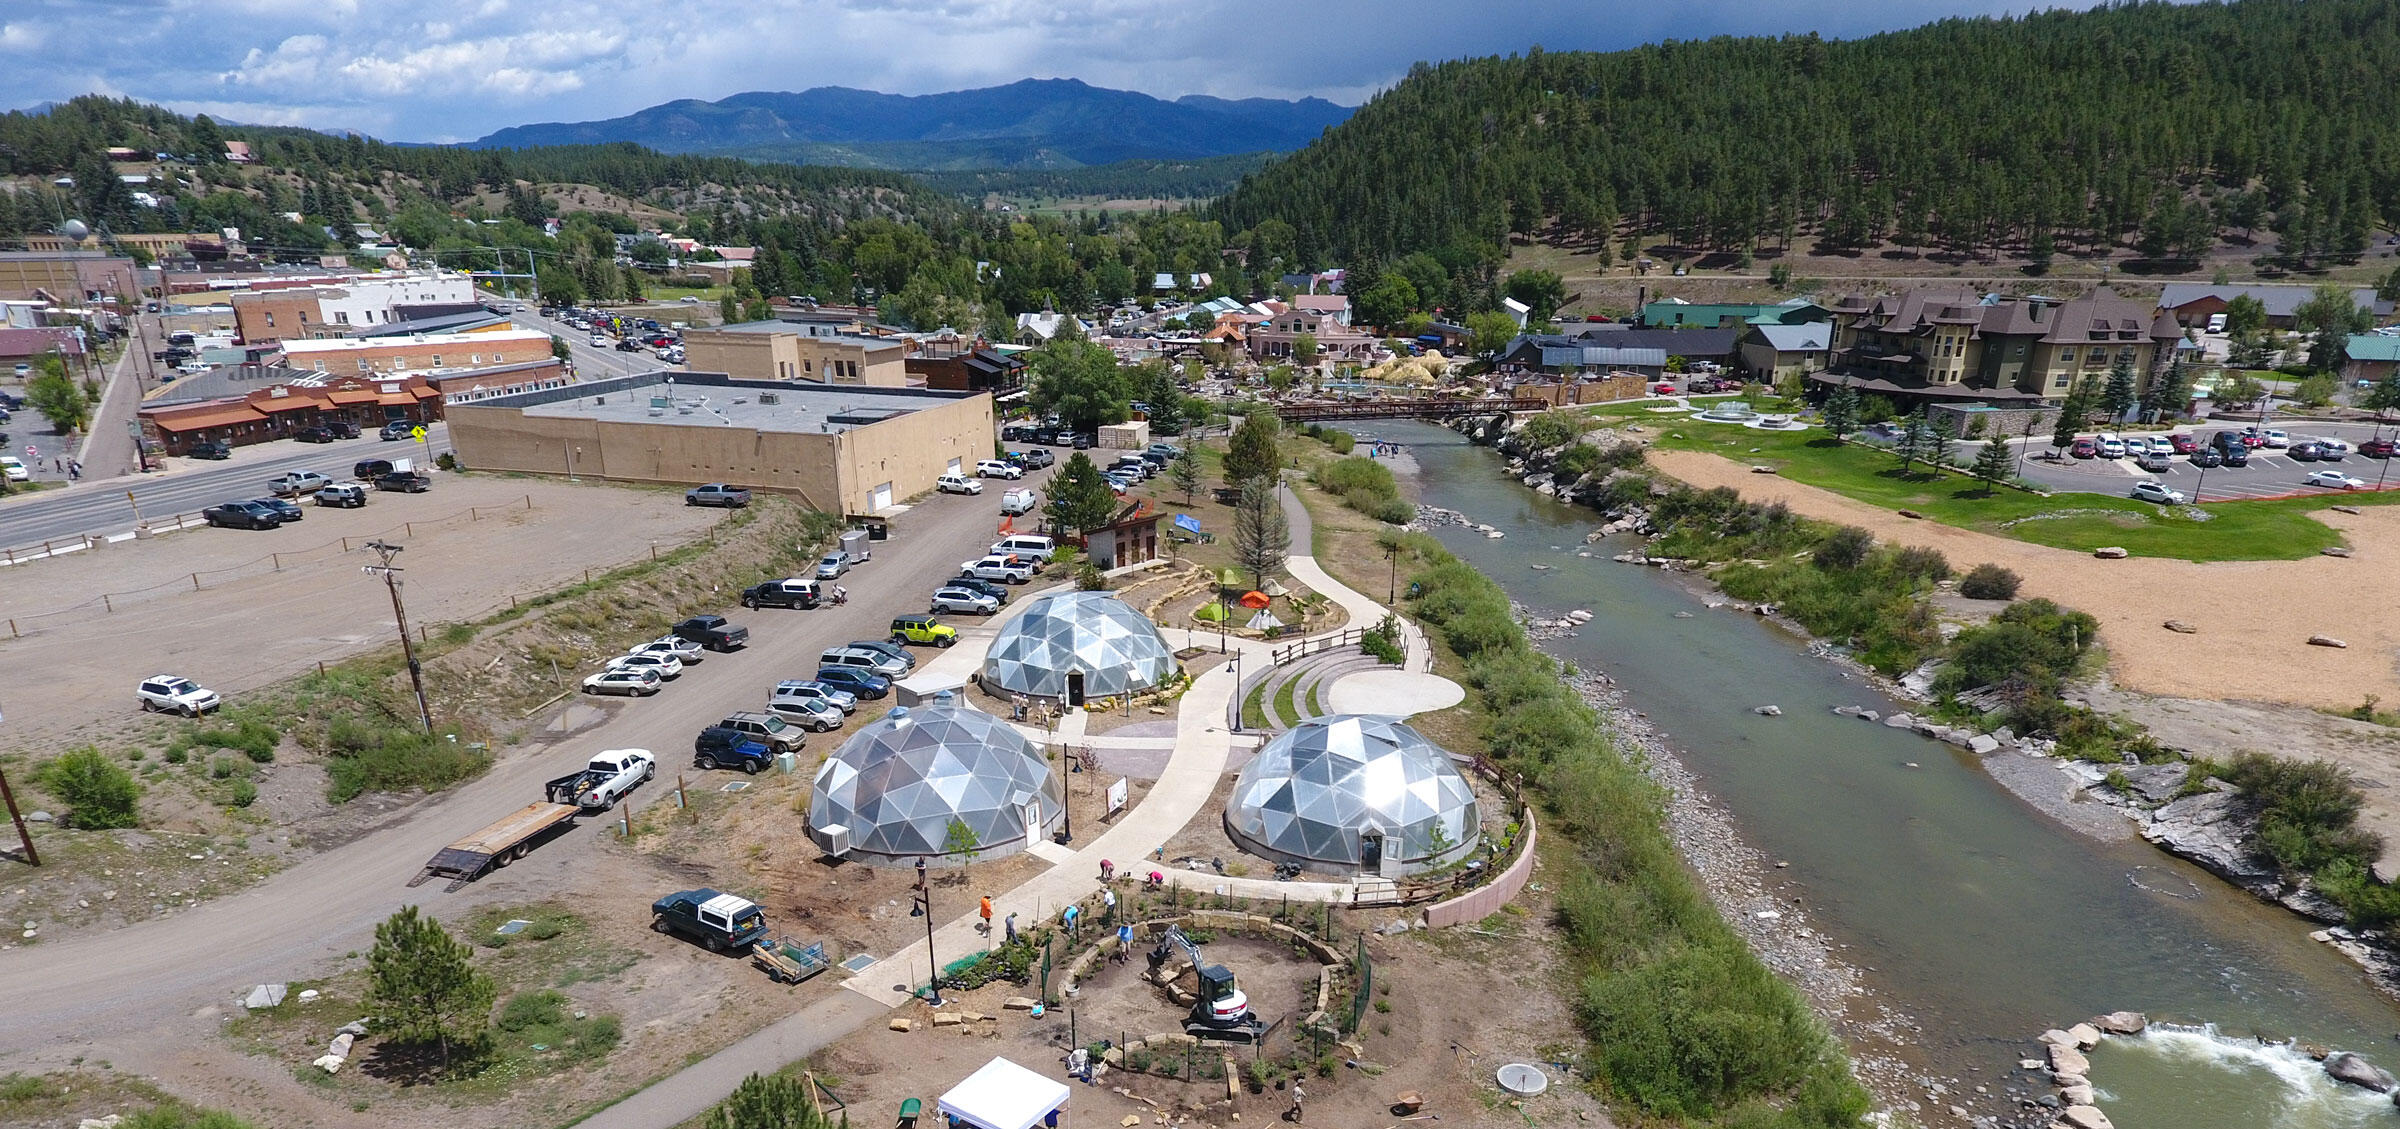 A new garden sits in front of geothermal domes by the river in Pagosa Springs.